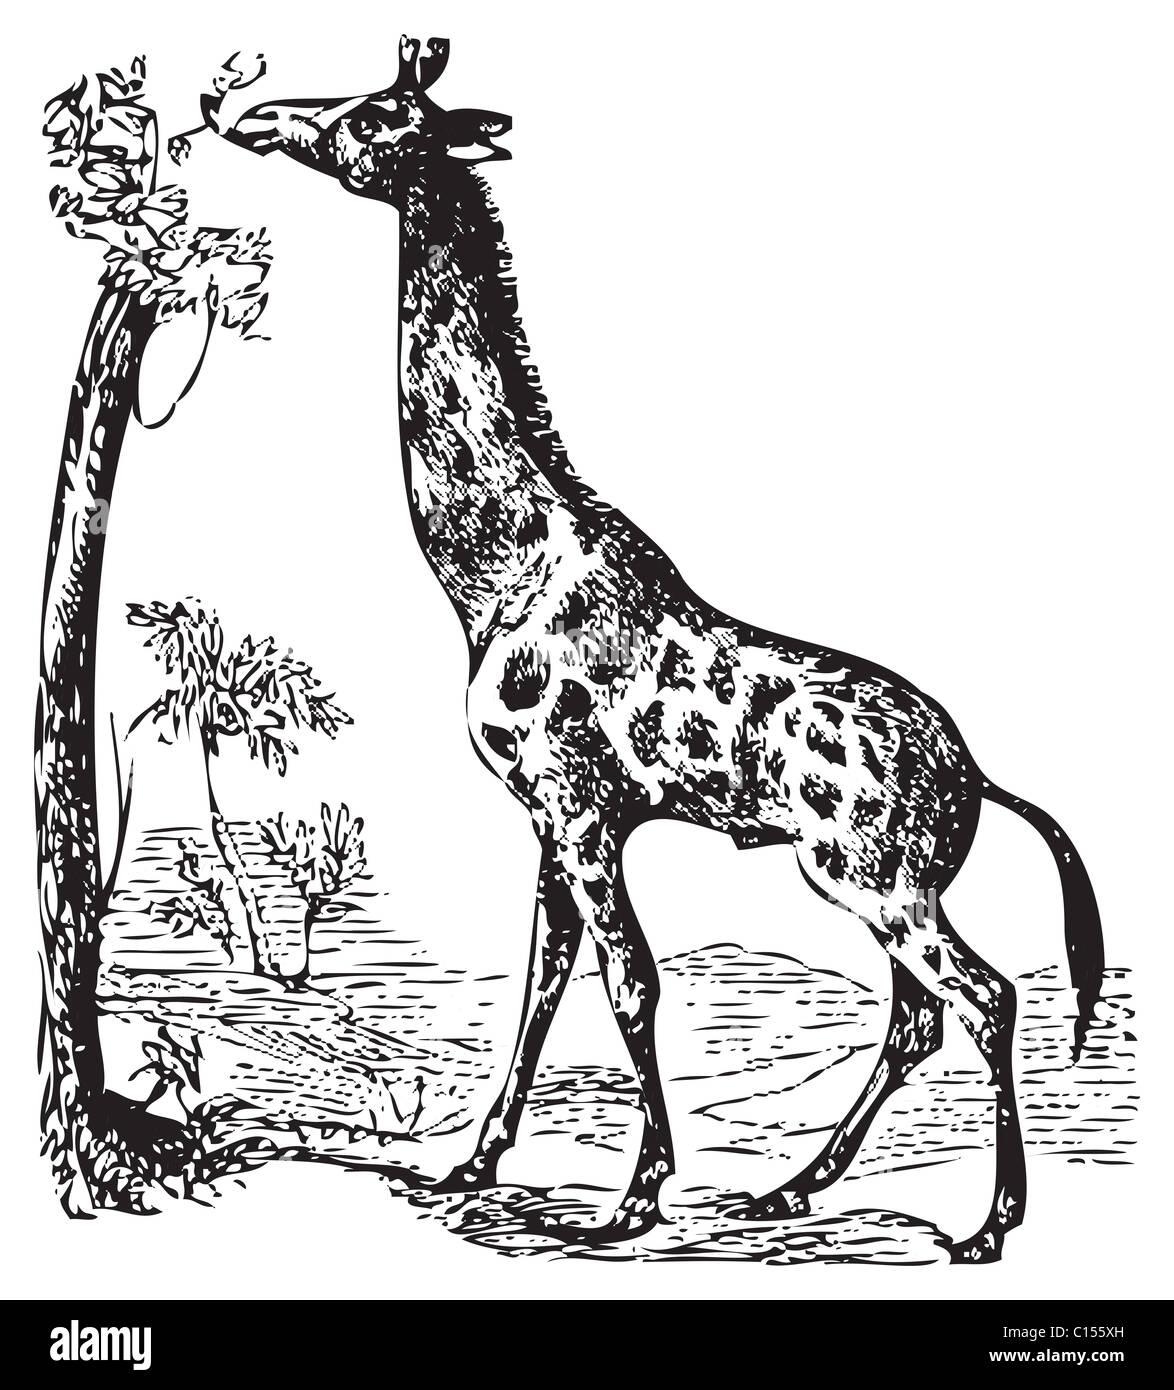 An illustration of a wild African Giraffe eating off the top branches of a tree. Old black and white engraving. From Trousset encyclopedia 1886-1891 Stock Photo